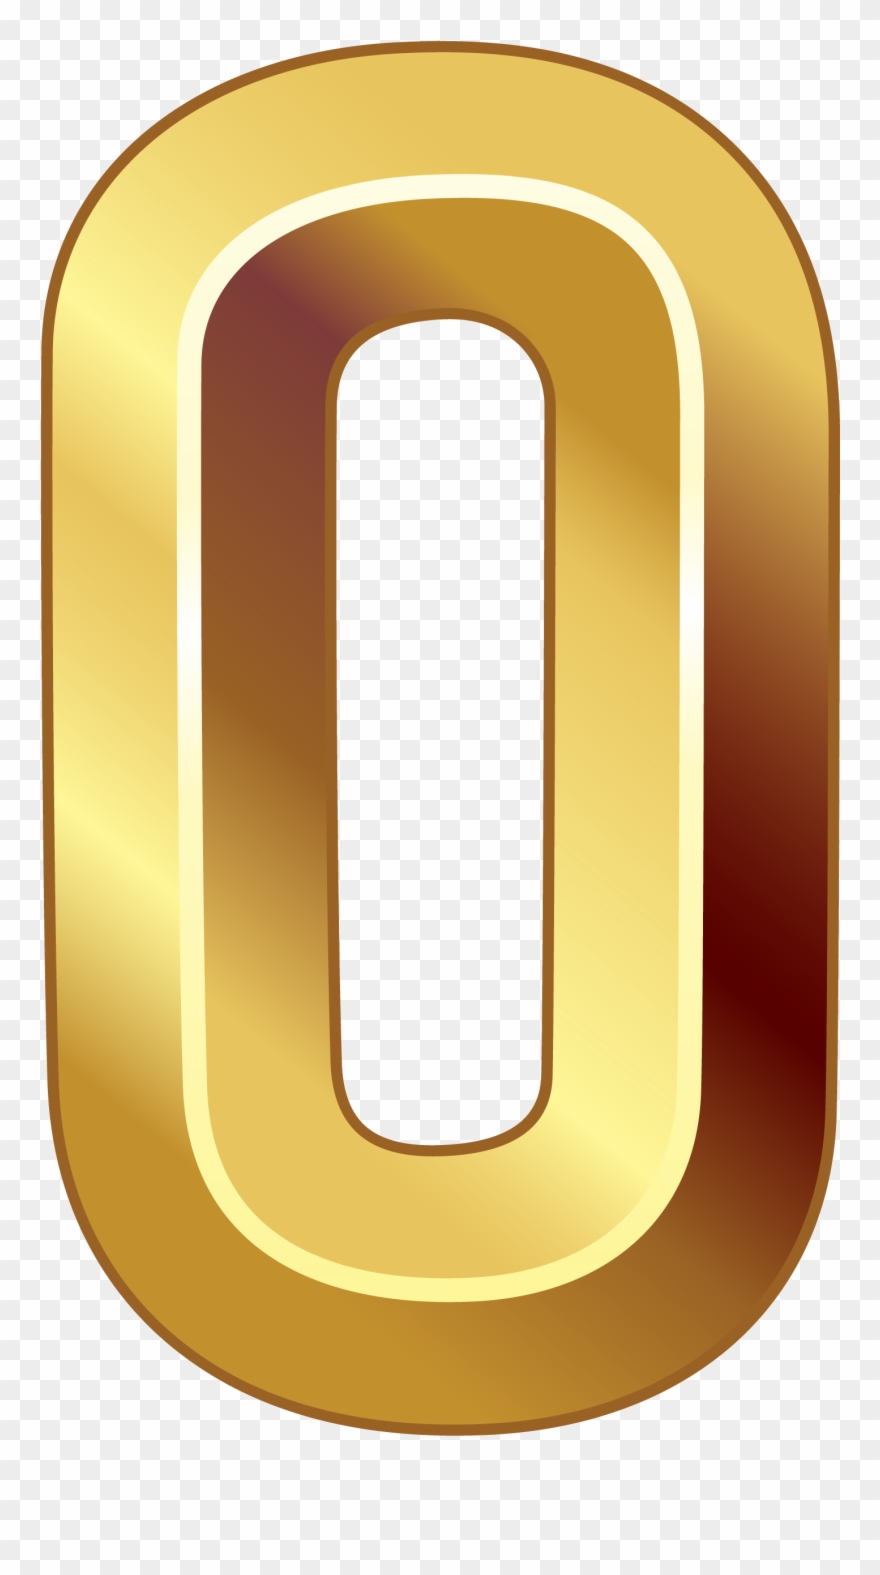 Gold Number Zero Png Clipart Image